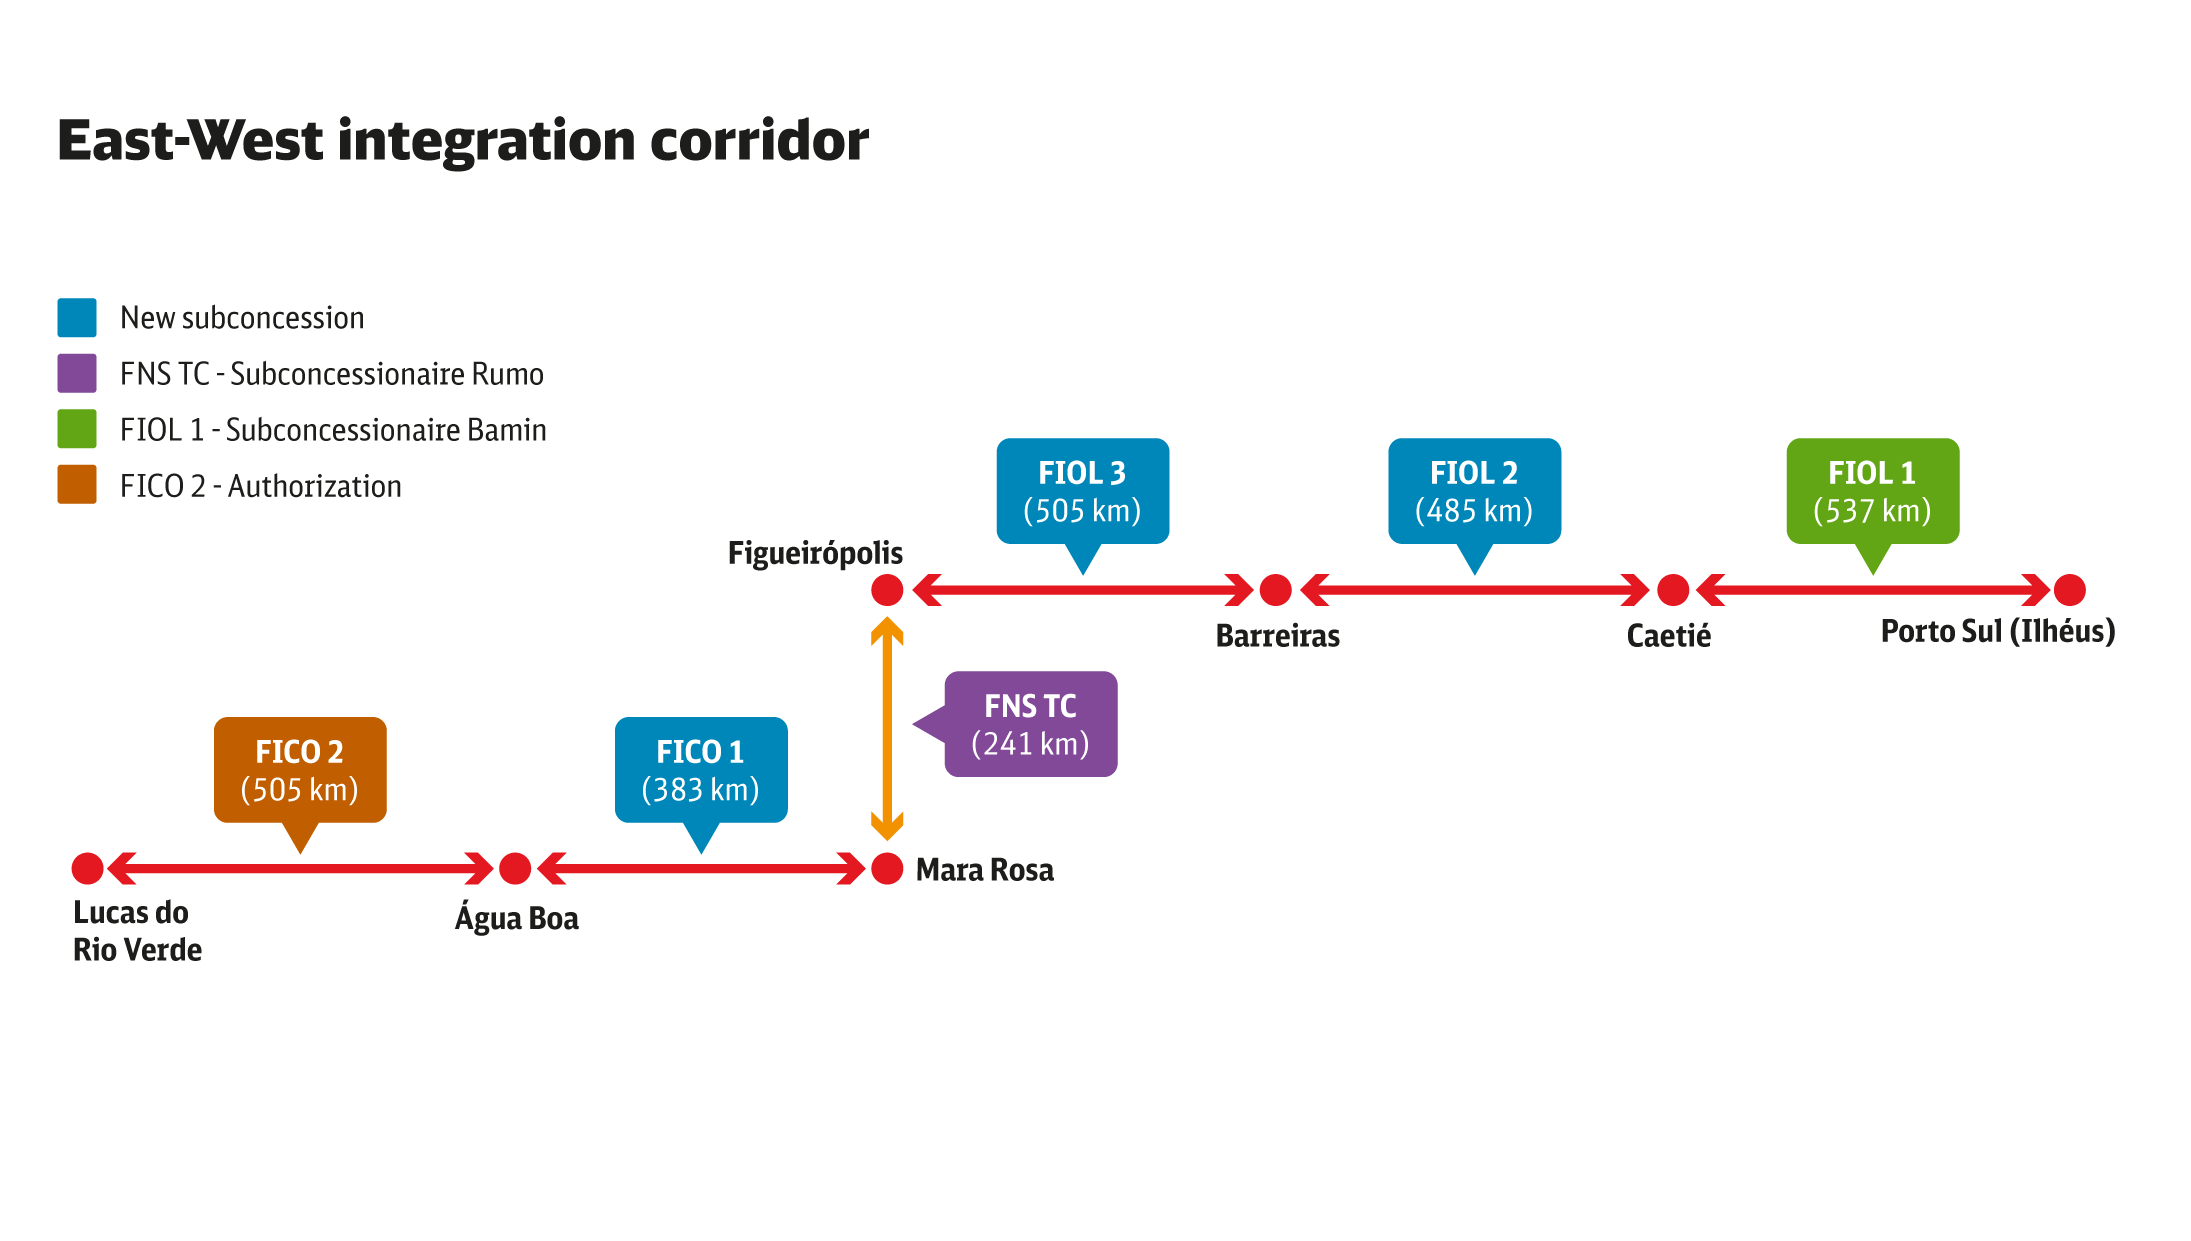 FICO-FIOL project: current phase of the sections of the railroad corridor